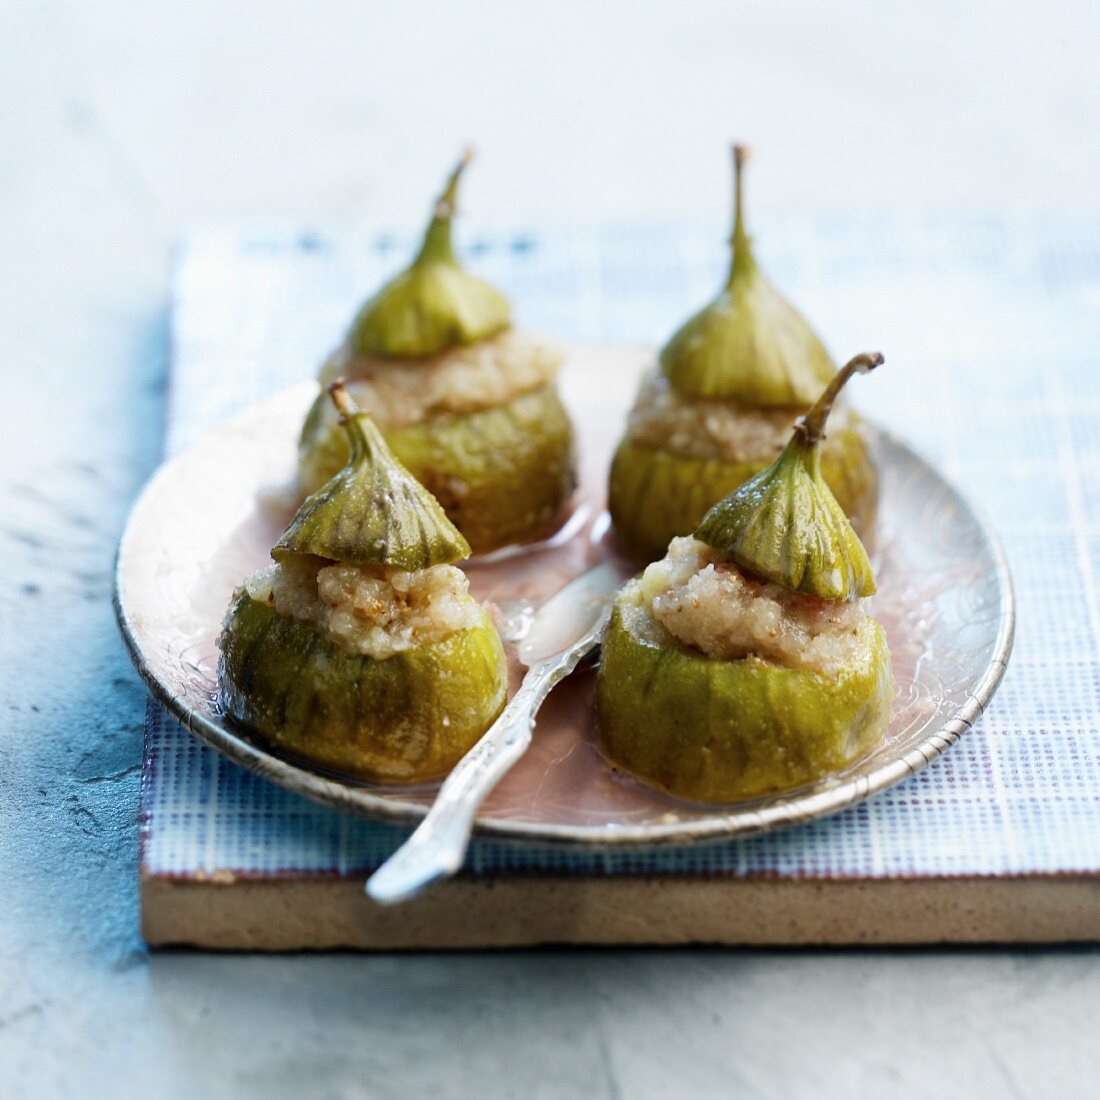 Figs with cream stuffing cooked in a Tajine